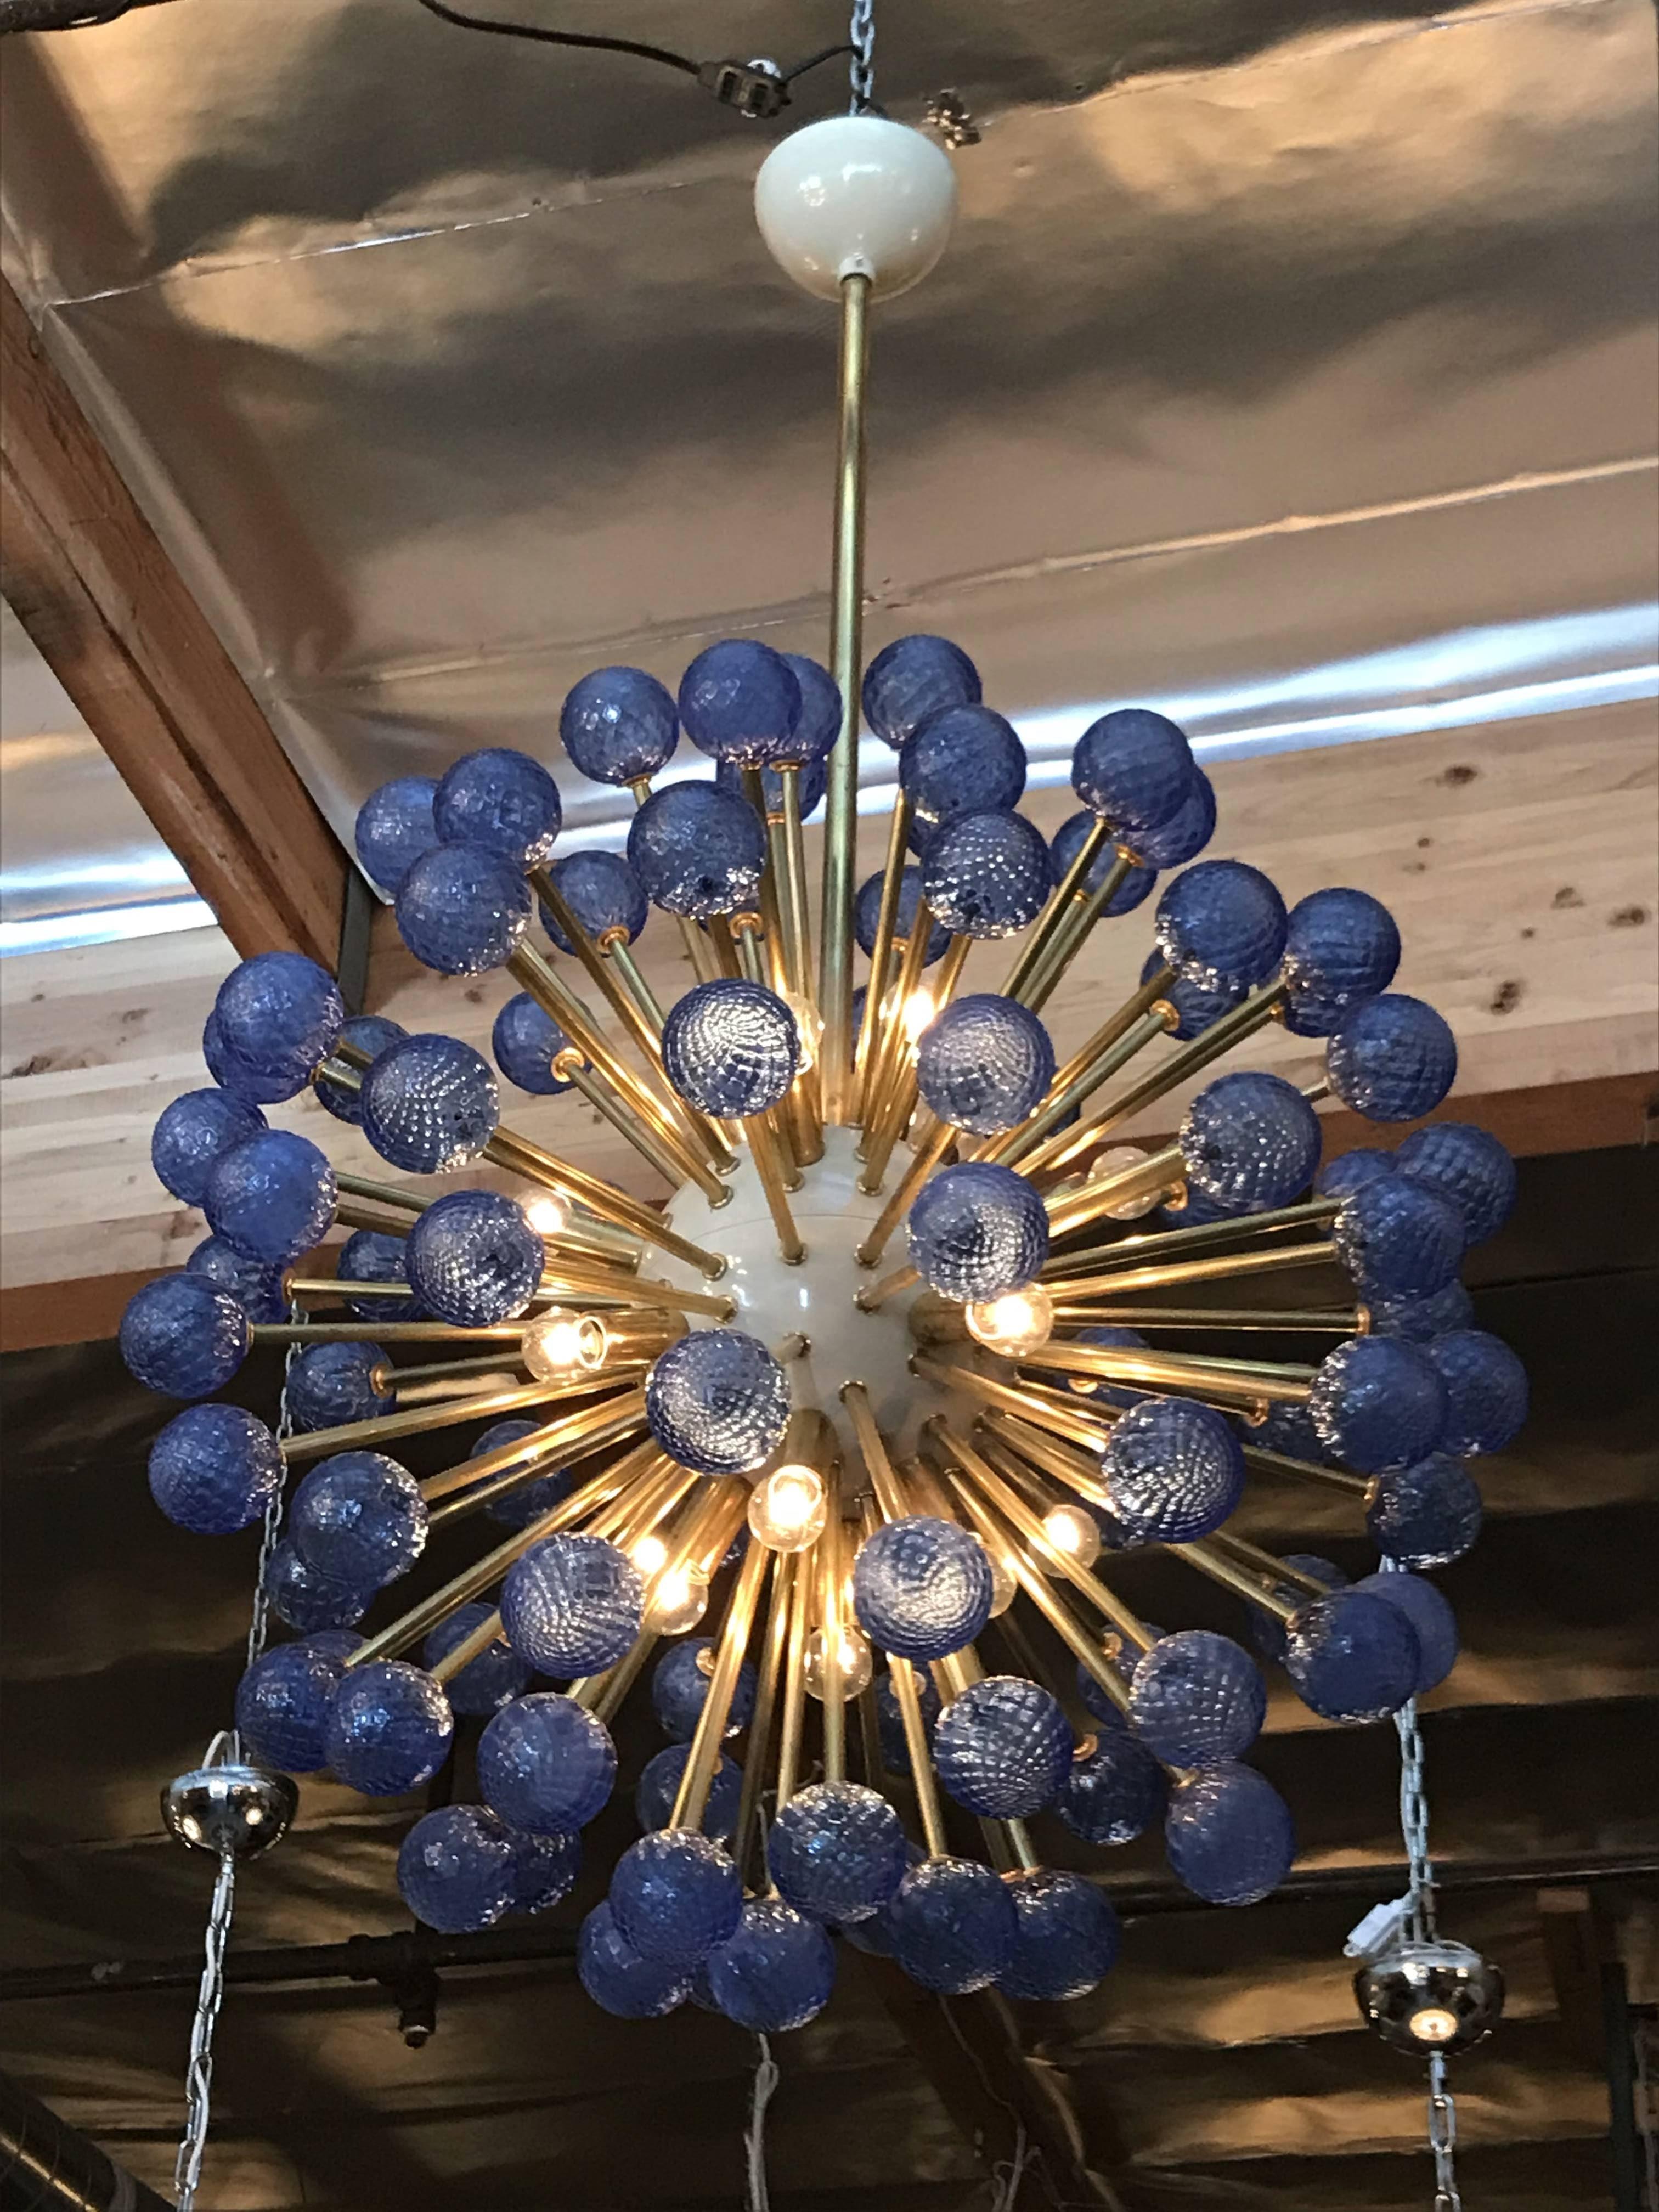 Italian modern Sputnik chandelier with blue Murano glass spheres, cream enameled centre and canopy, mounted on brass frame / Designed by Fabio Bergomi for Fabio Ltd / Made in Italy
16 lights / E12 or E14 type / max 40W each
Measures: Height 50